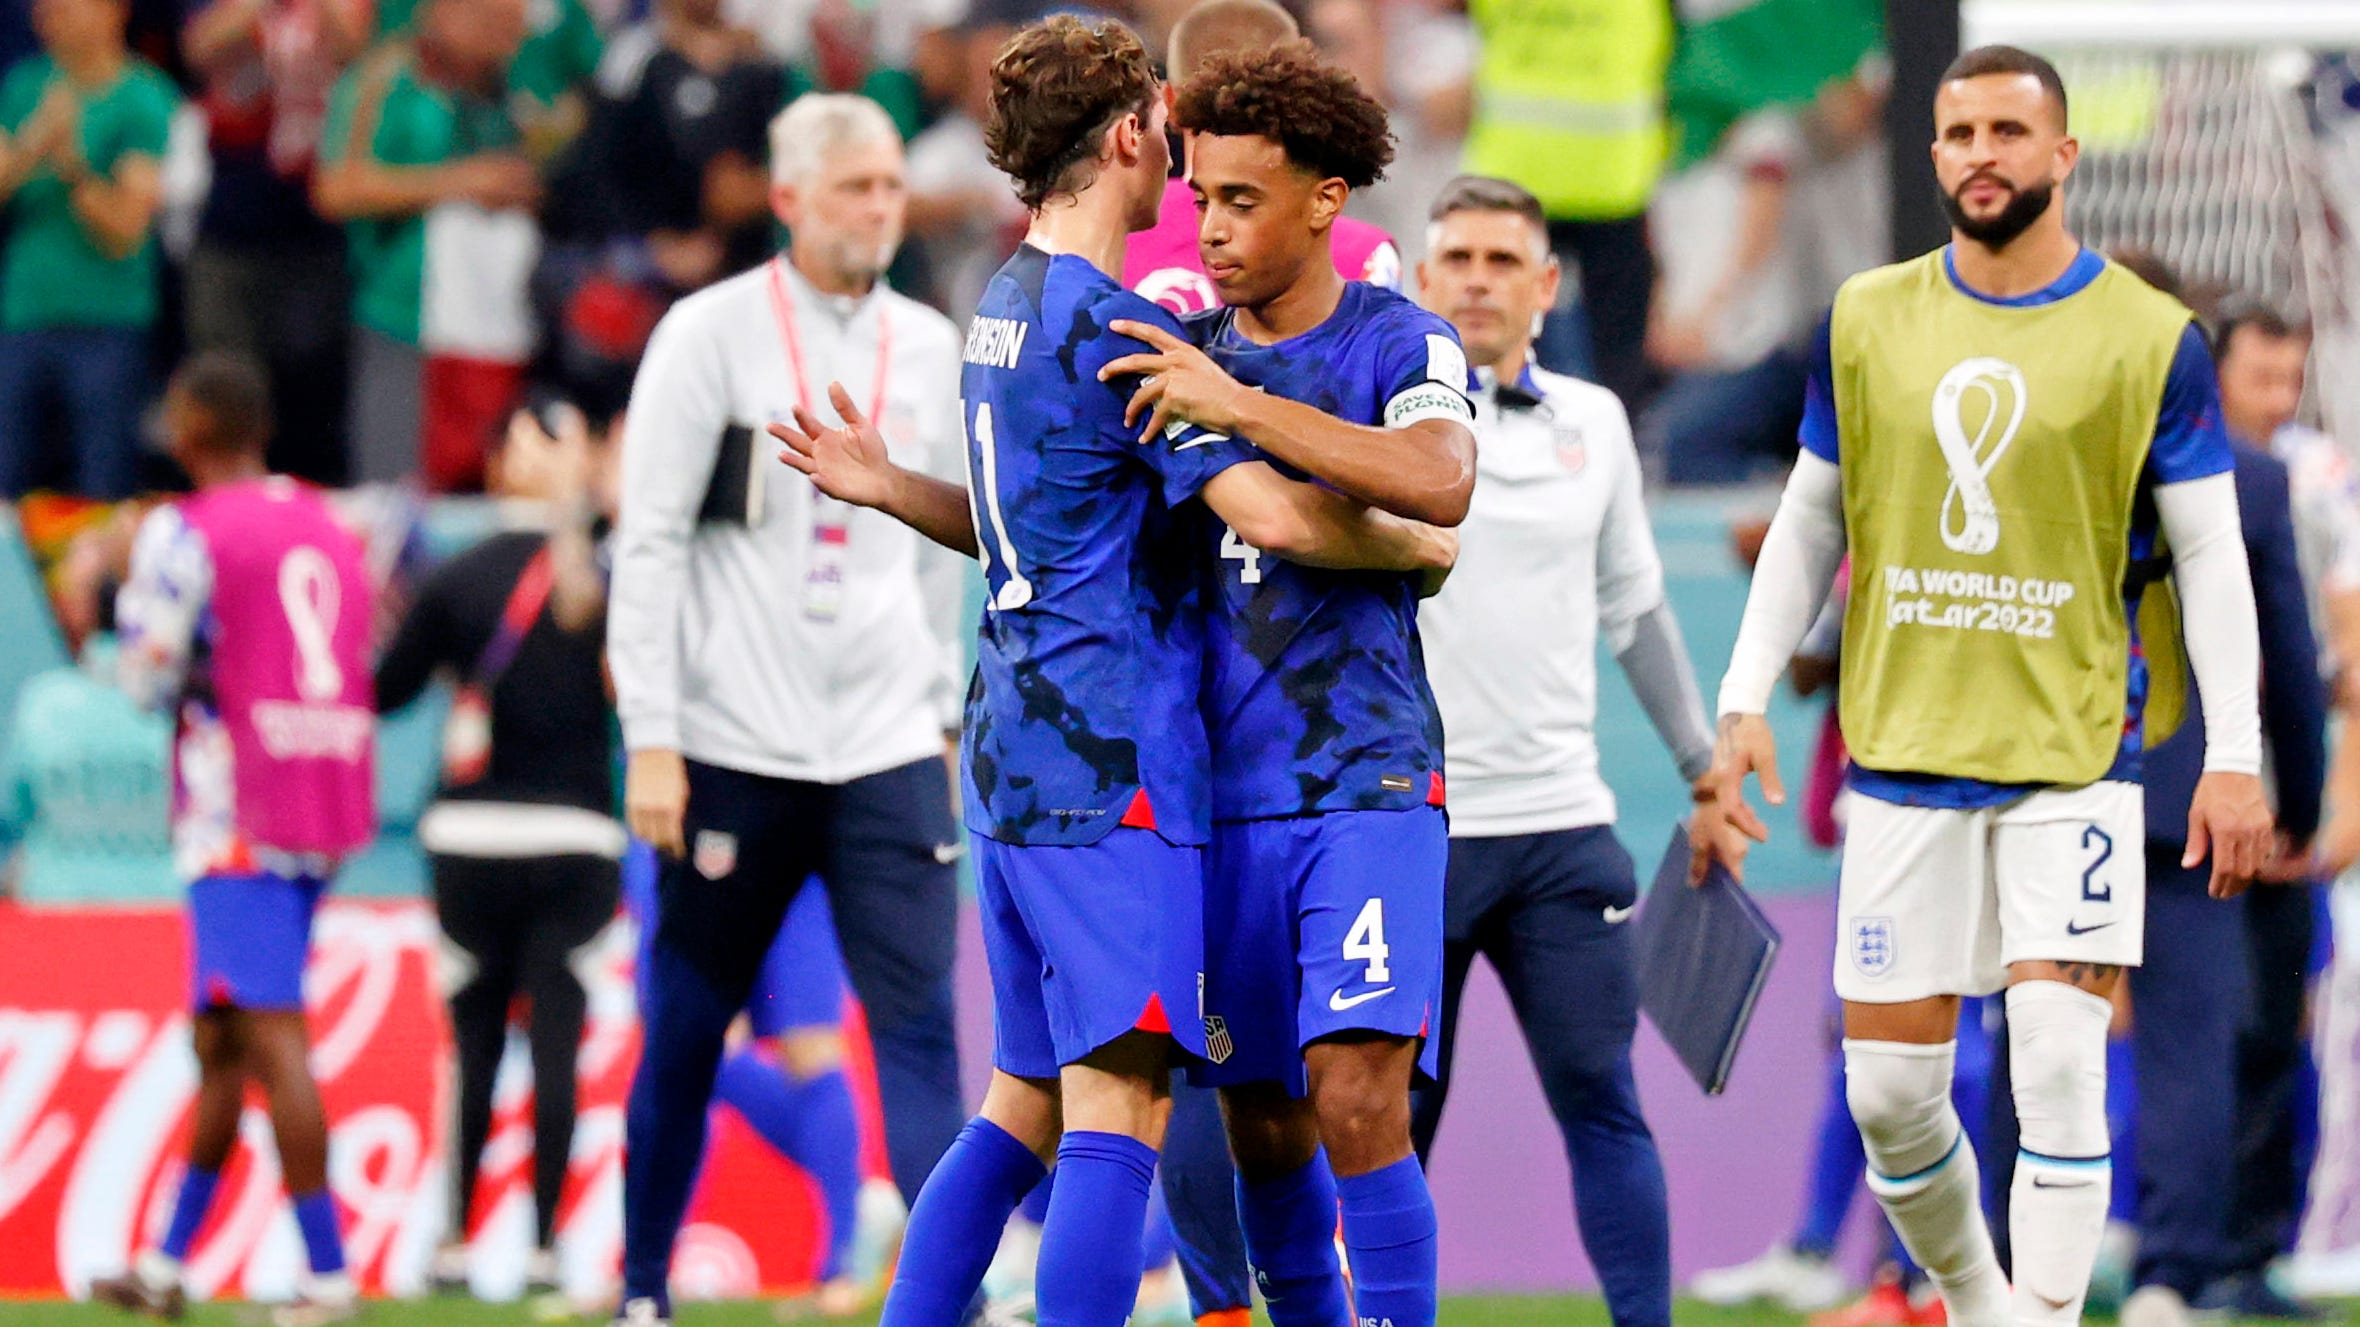 USMNT earns point, and some massive respect, in 0-0 draw with England at World Cup | Opinion